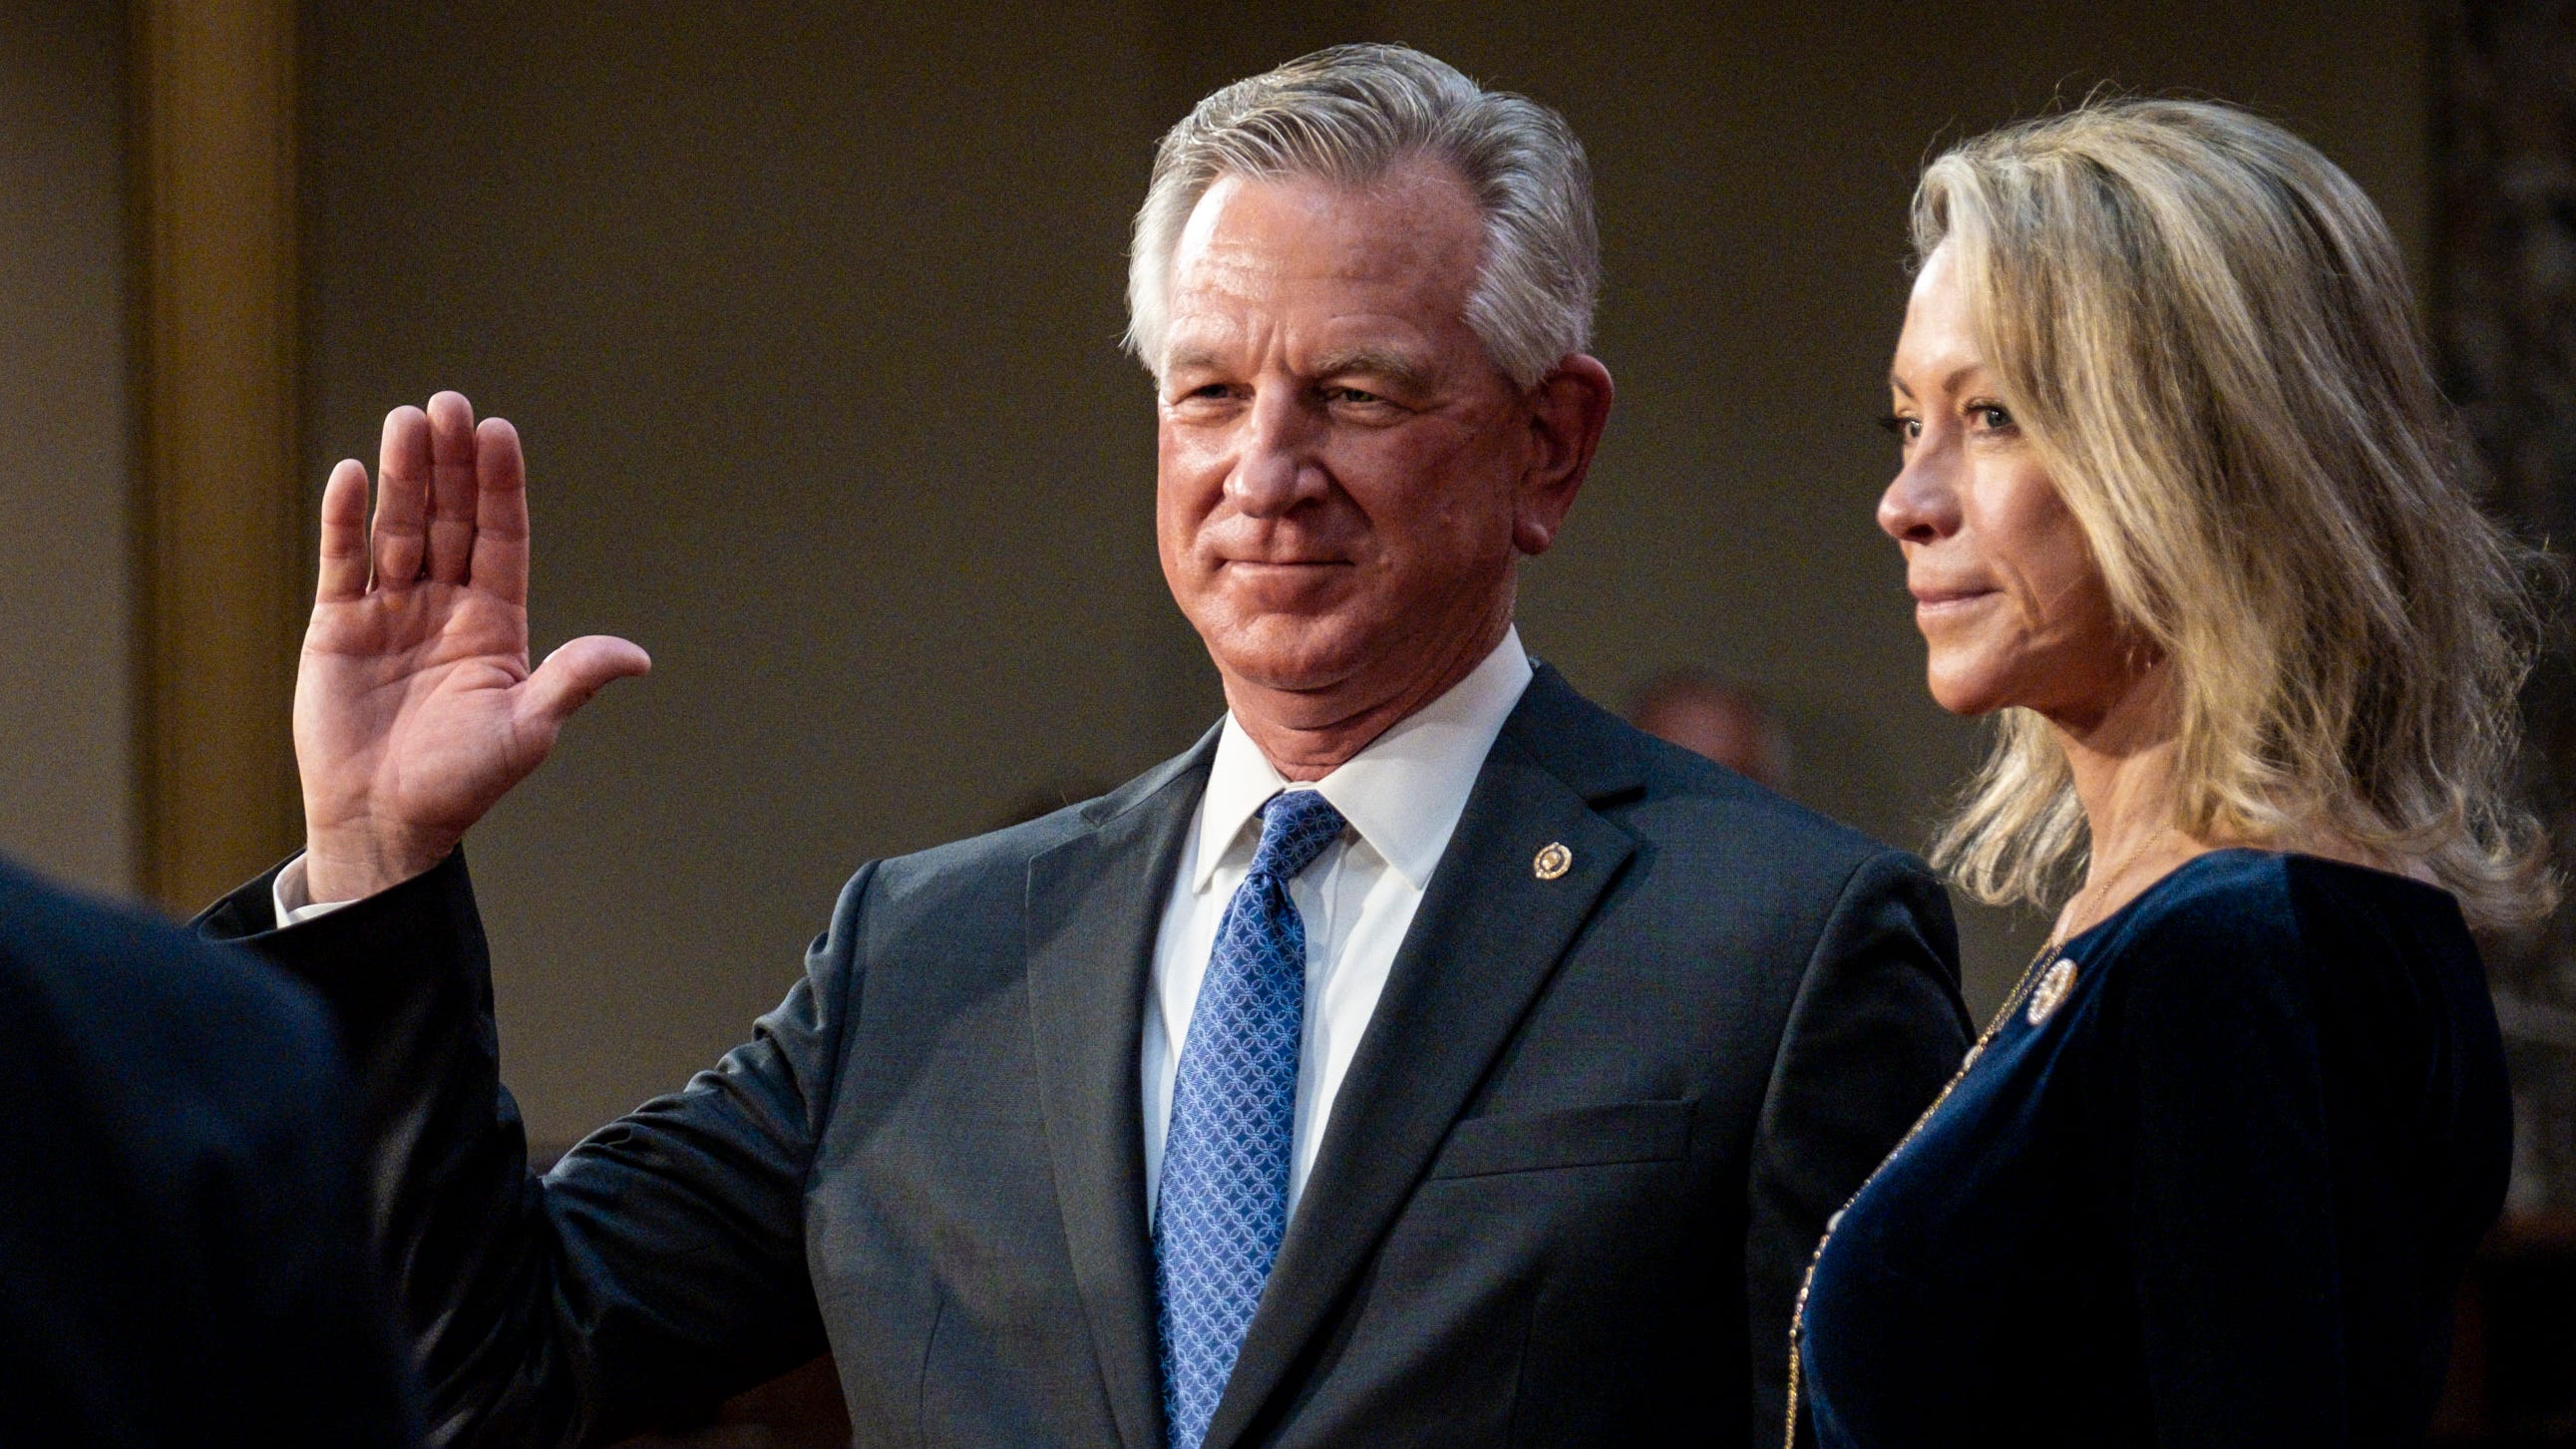 Republicans silent as Tuberville’s racist remarks on reparations spark outrage